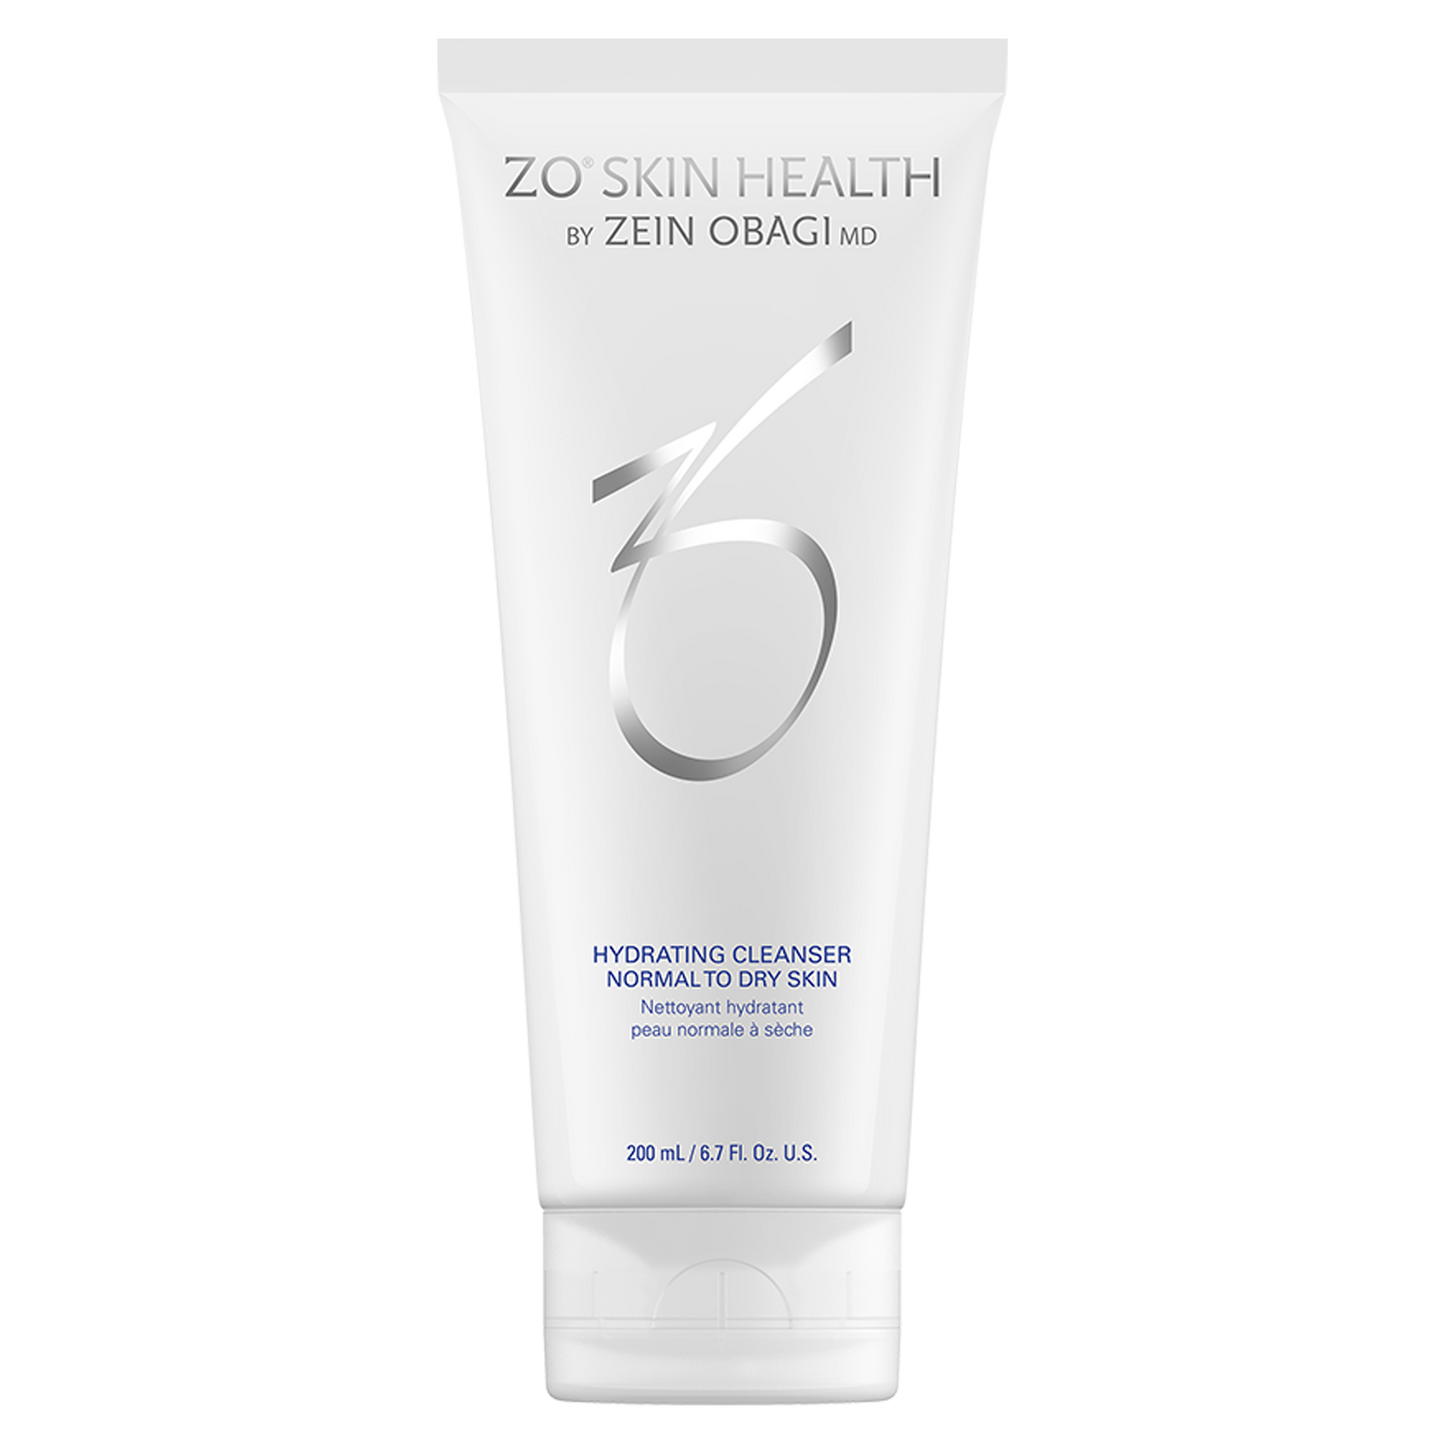 HYDRATING CLEANSER (Normal to Dry Skin)